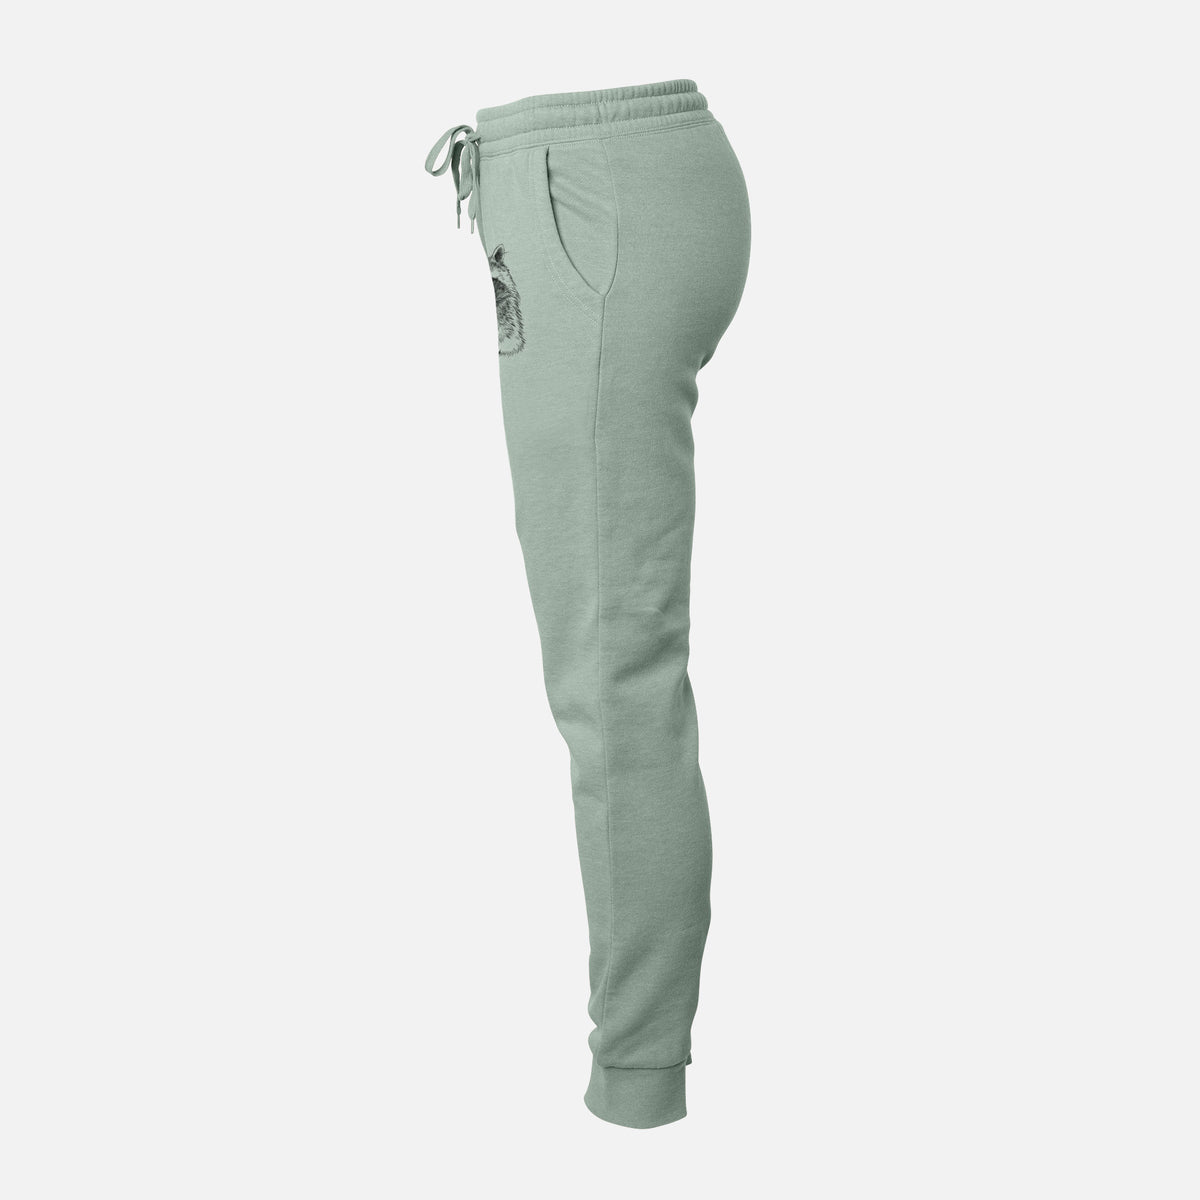 It&#39;s All Connected - Manatee - Women&#39;s Cali Wave Jogger Sweatpants